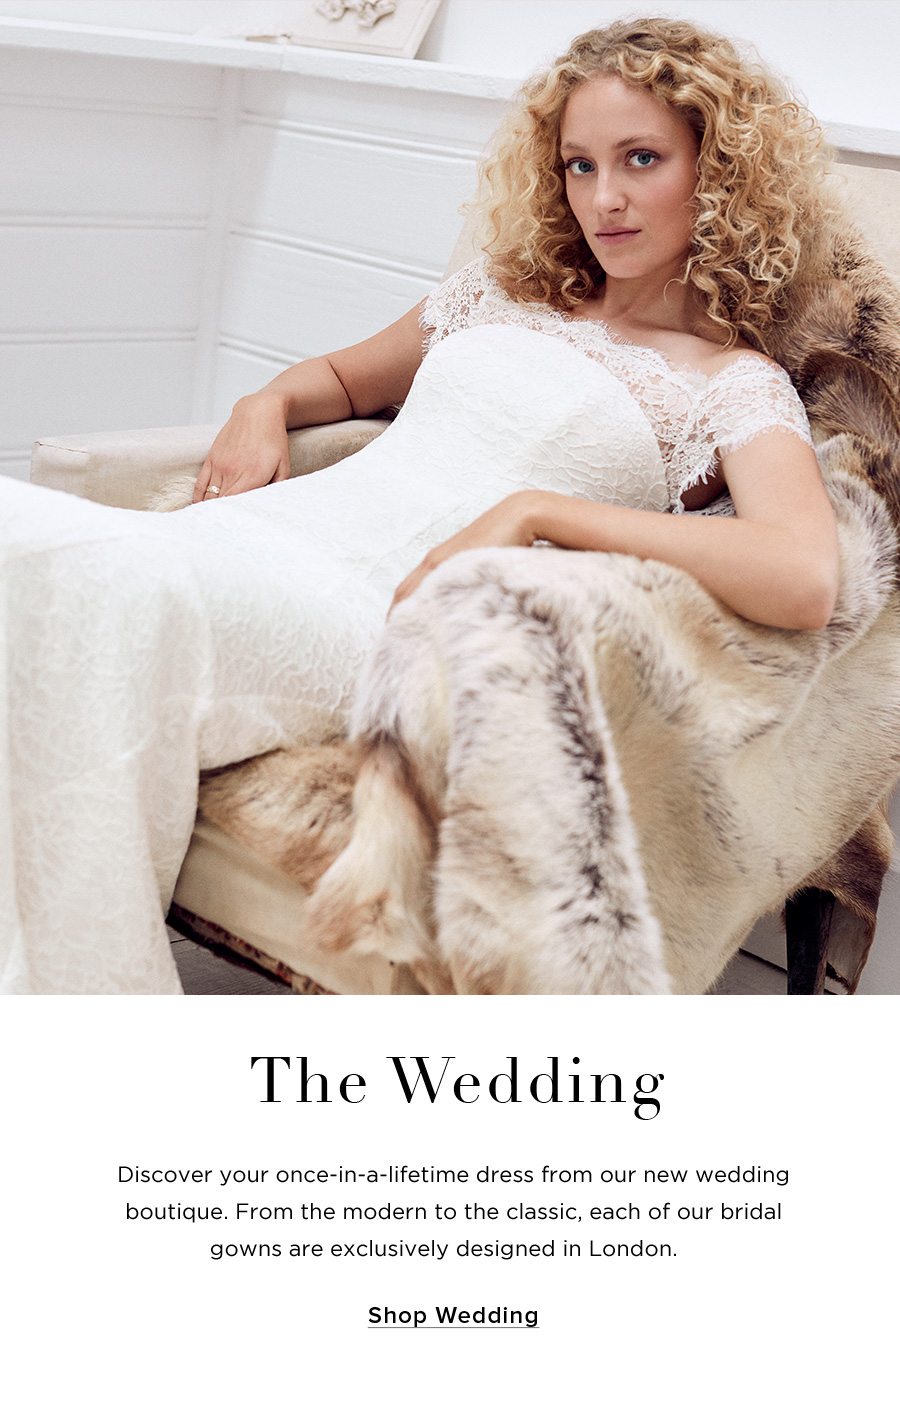 The Wedding Discover your once-in-a-lifetime dress from our new wedding boutique. From the modern to the classic, each of our bridal gowns are exclusively designed in London.